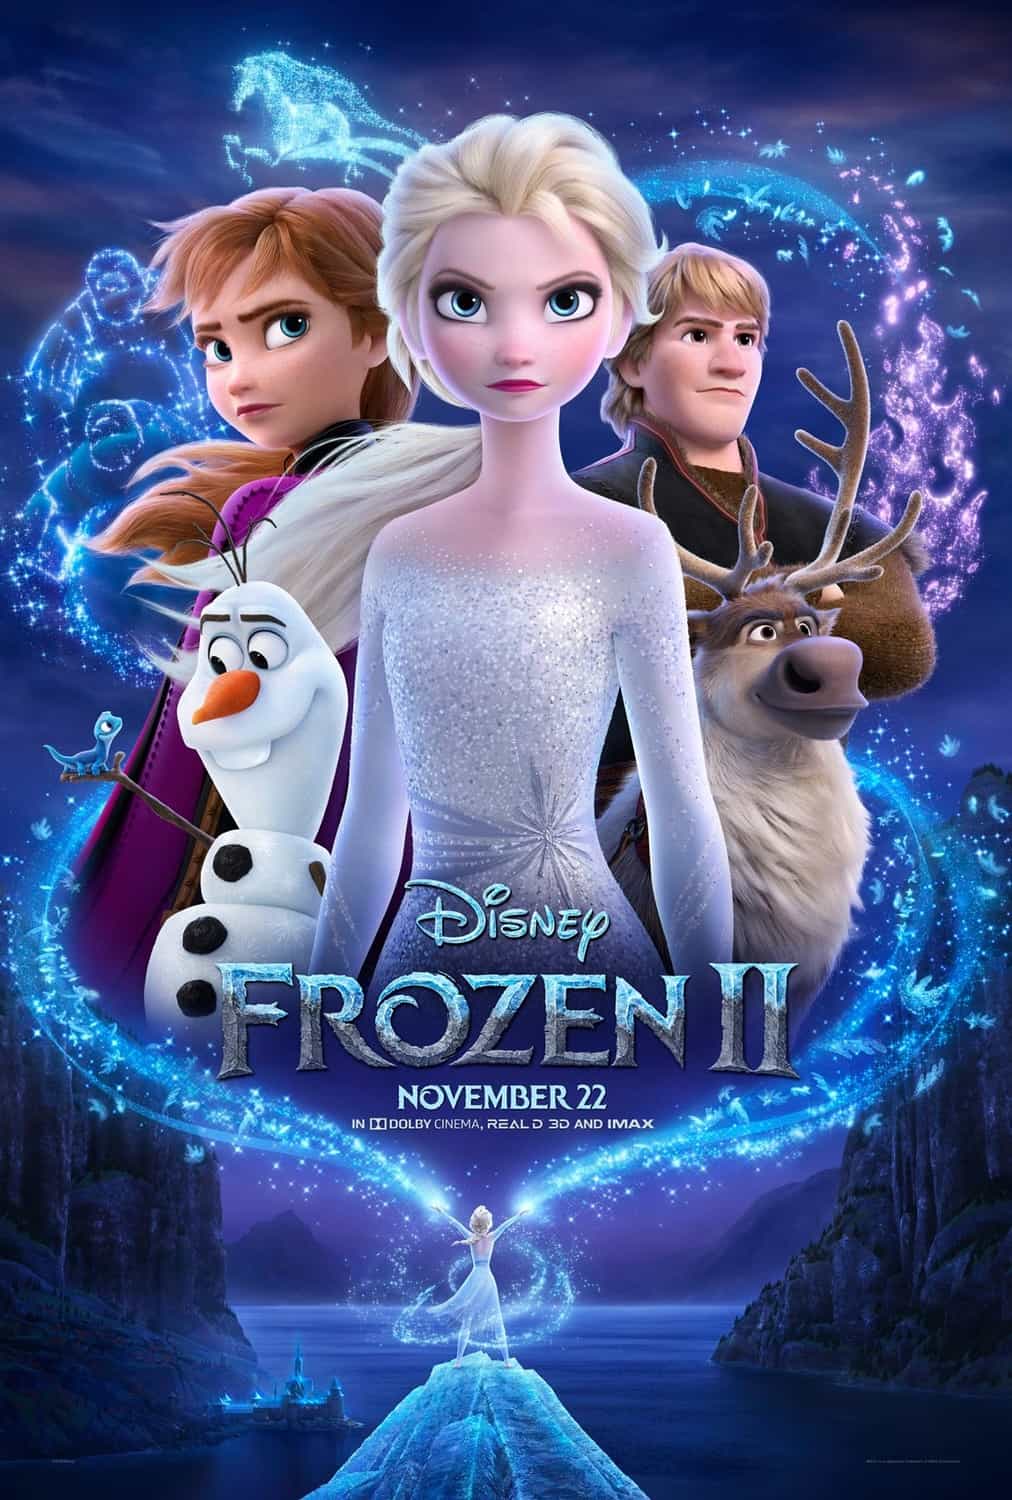 Home Video And Streaming Chart in the UK 8th - 14th April 2020: Frozen II is still at he top of the chart with Jumanji: The Next Level making a new entry at 2